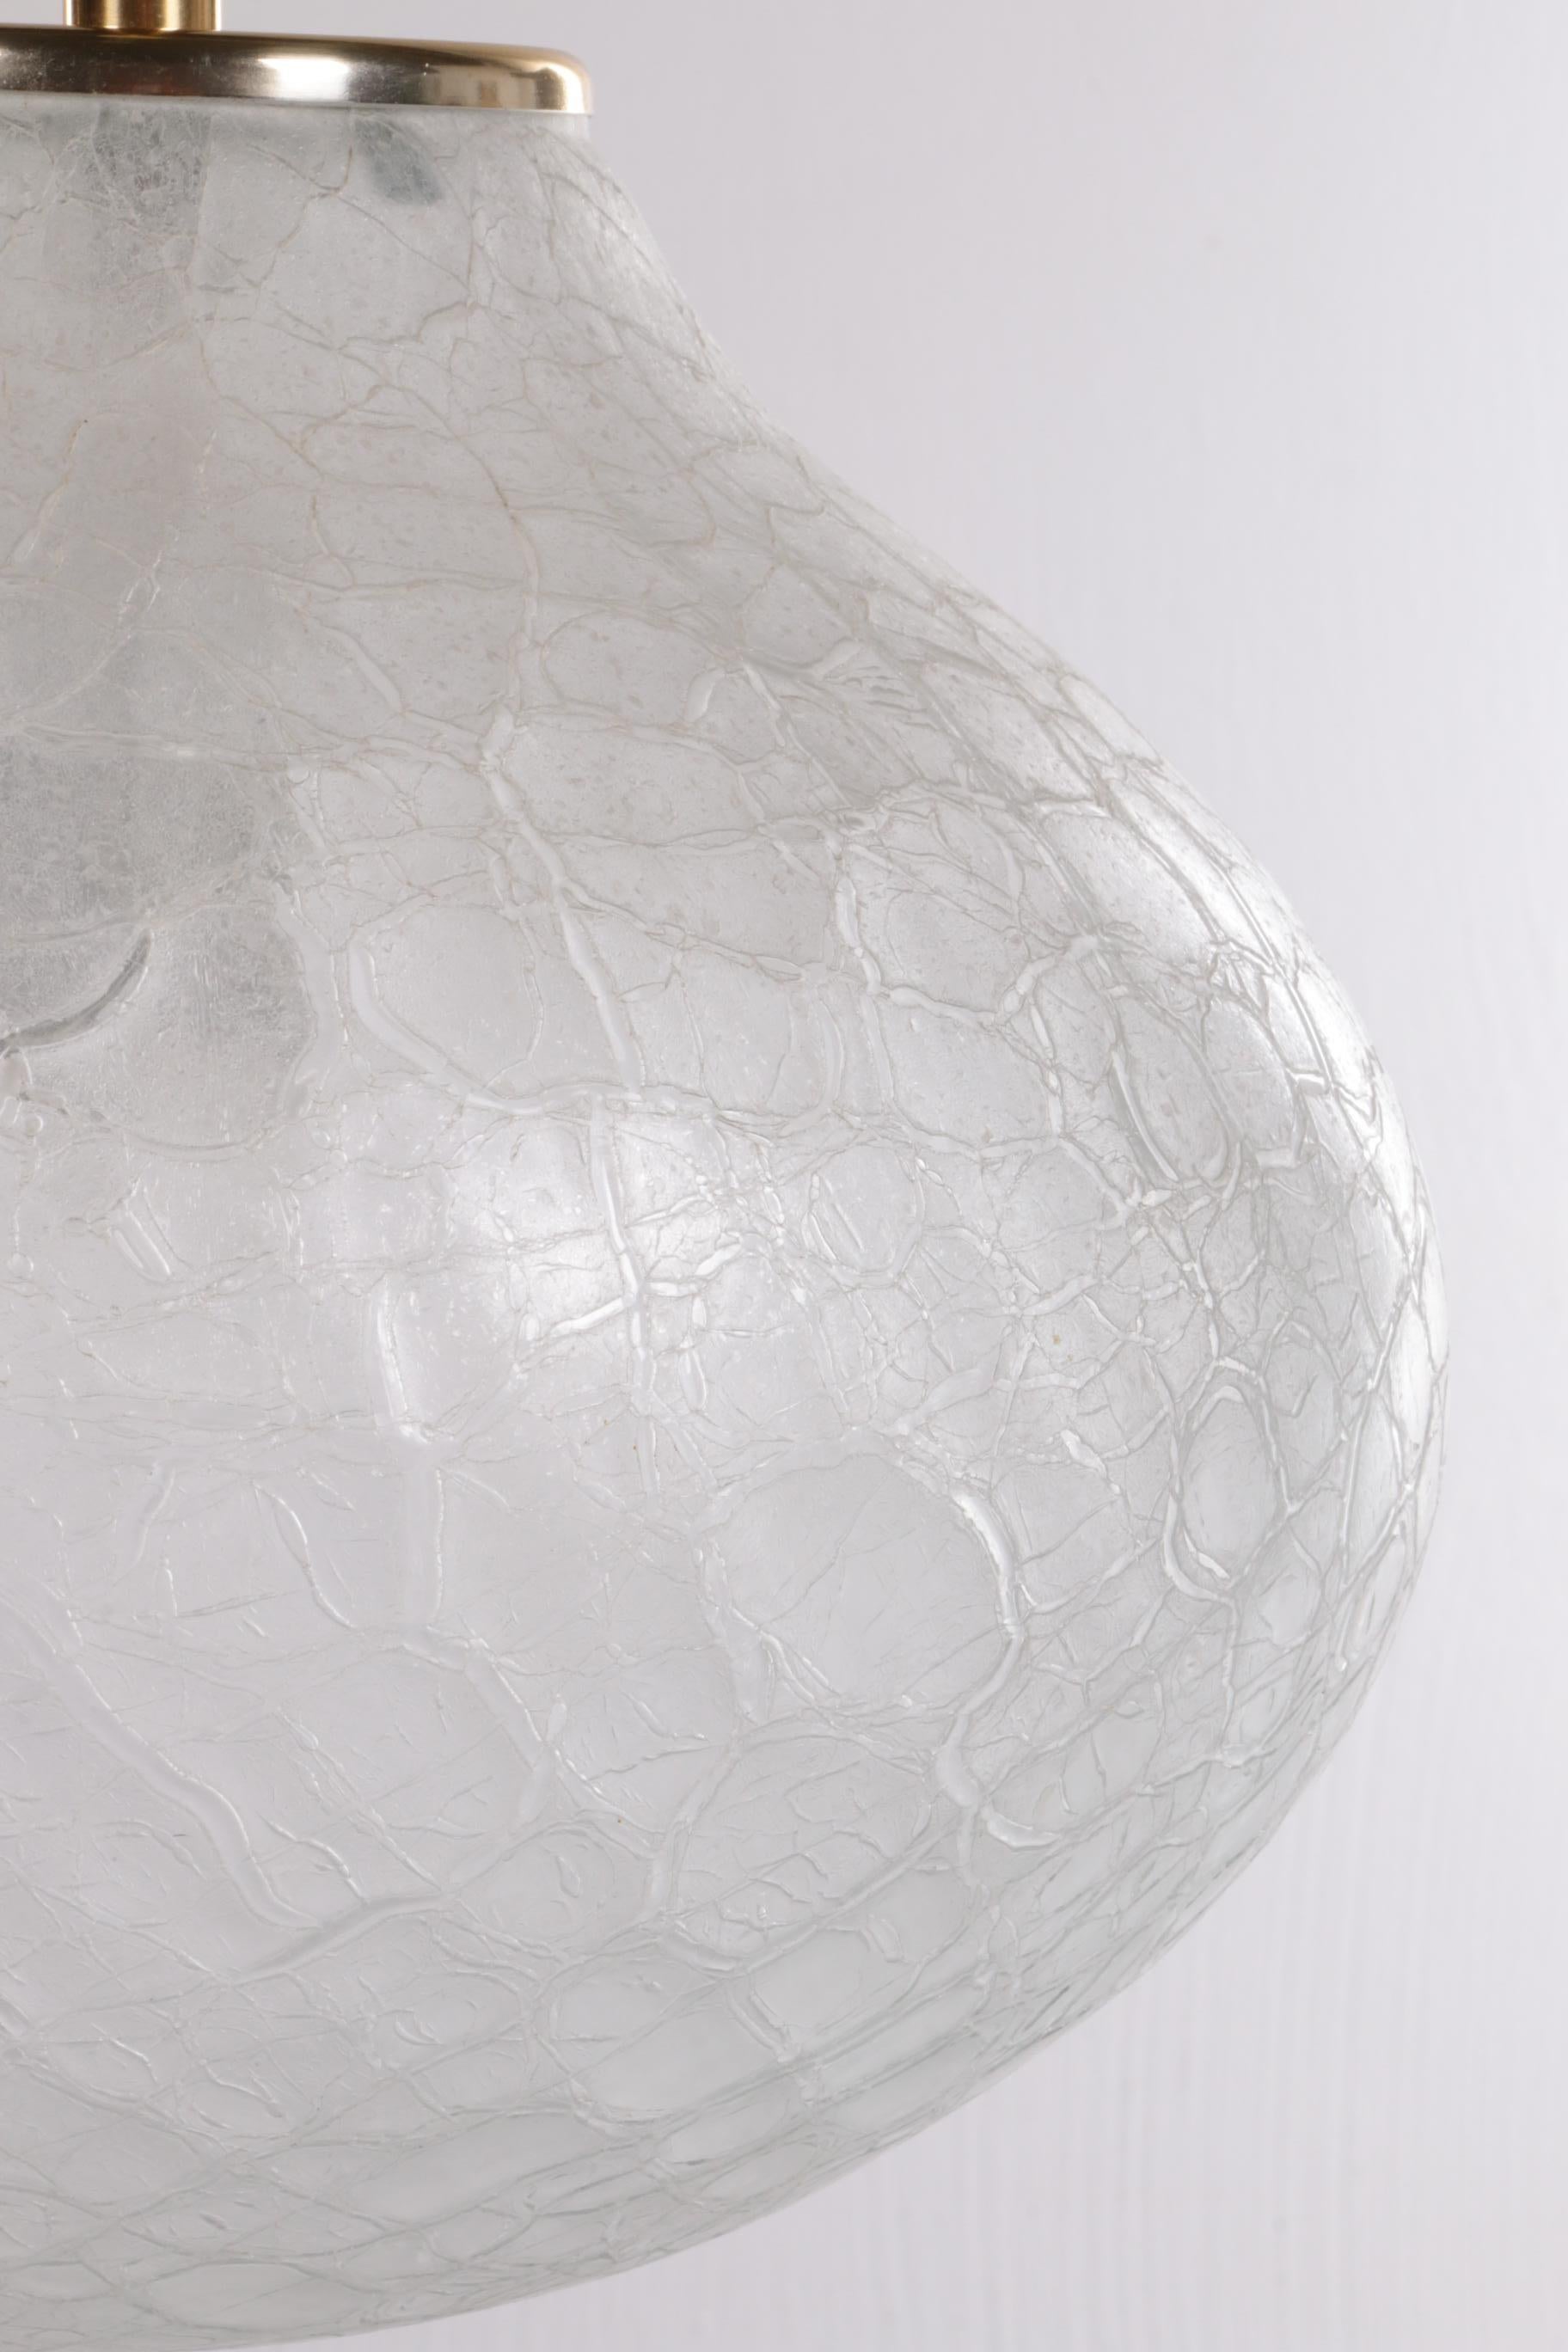 Very Rare Glass Hanging Lamp by Doria Leuchten, 1960, Germany For Sale 1